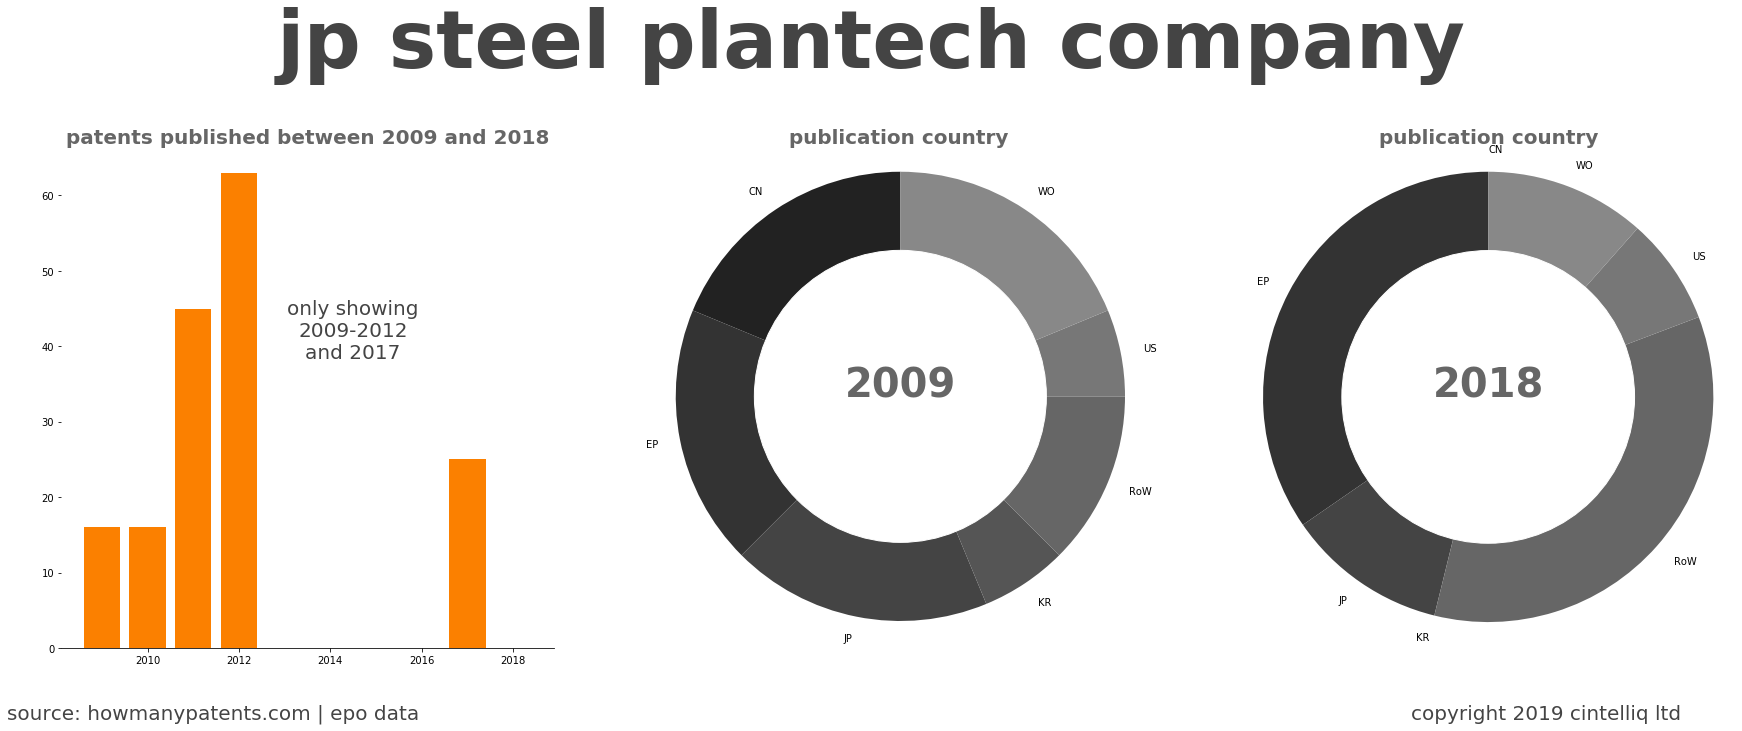 summary of patents for Jp Steel Plantech Company